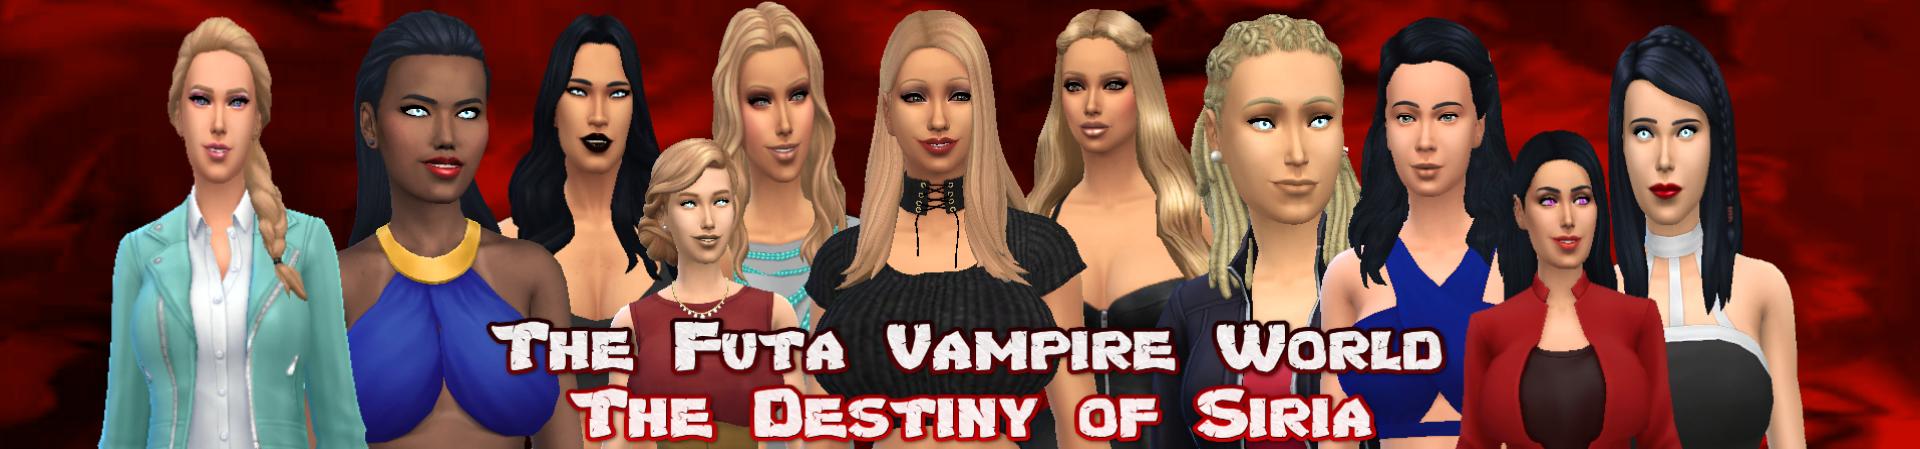 The Destiny of Siria Version 0.0.2.0.1 by 88Michele88